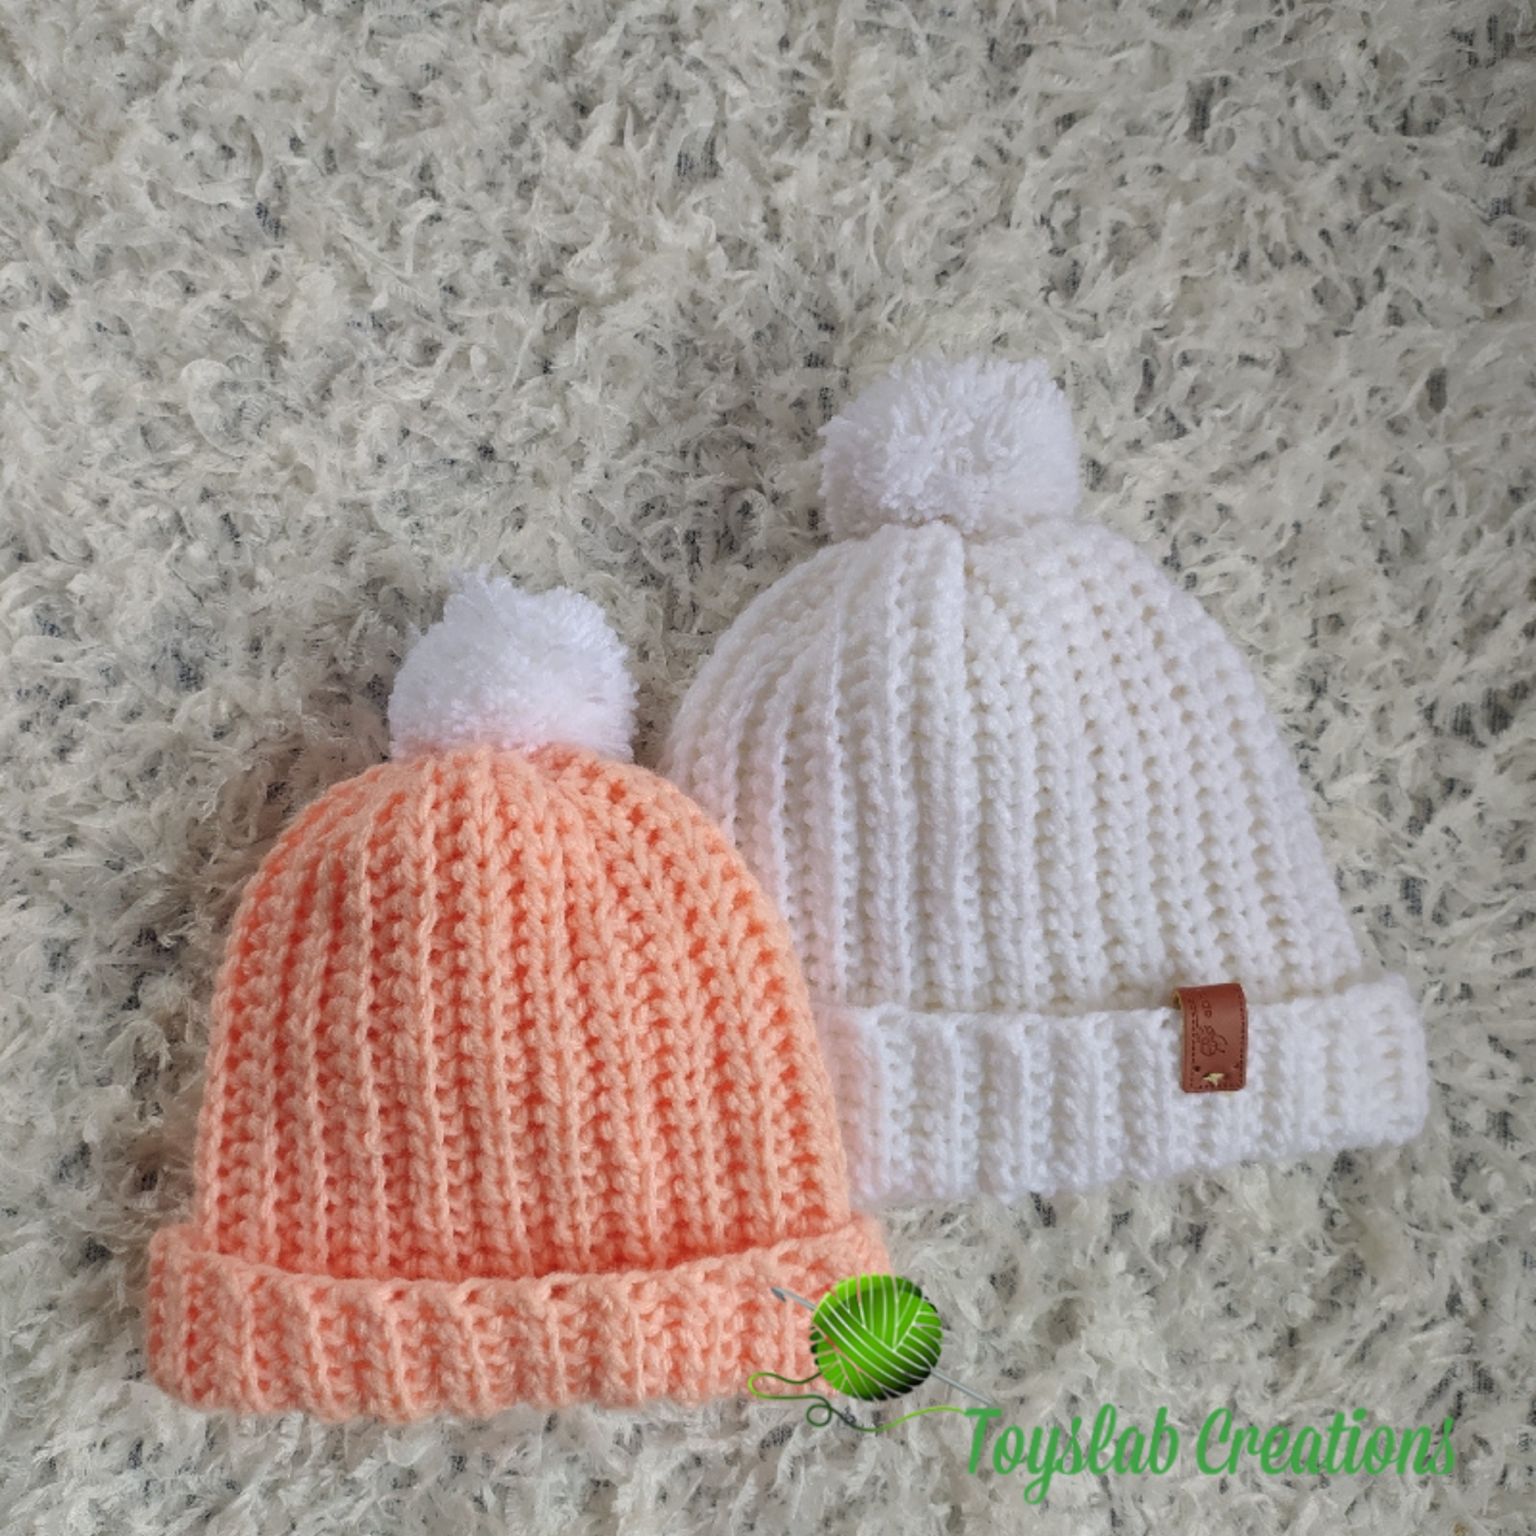 Knit Look Crochet Hat | toyslab creations